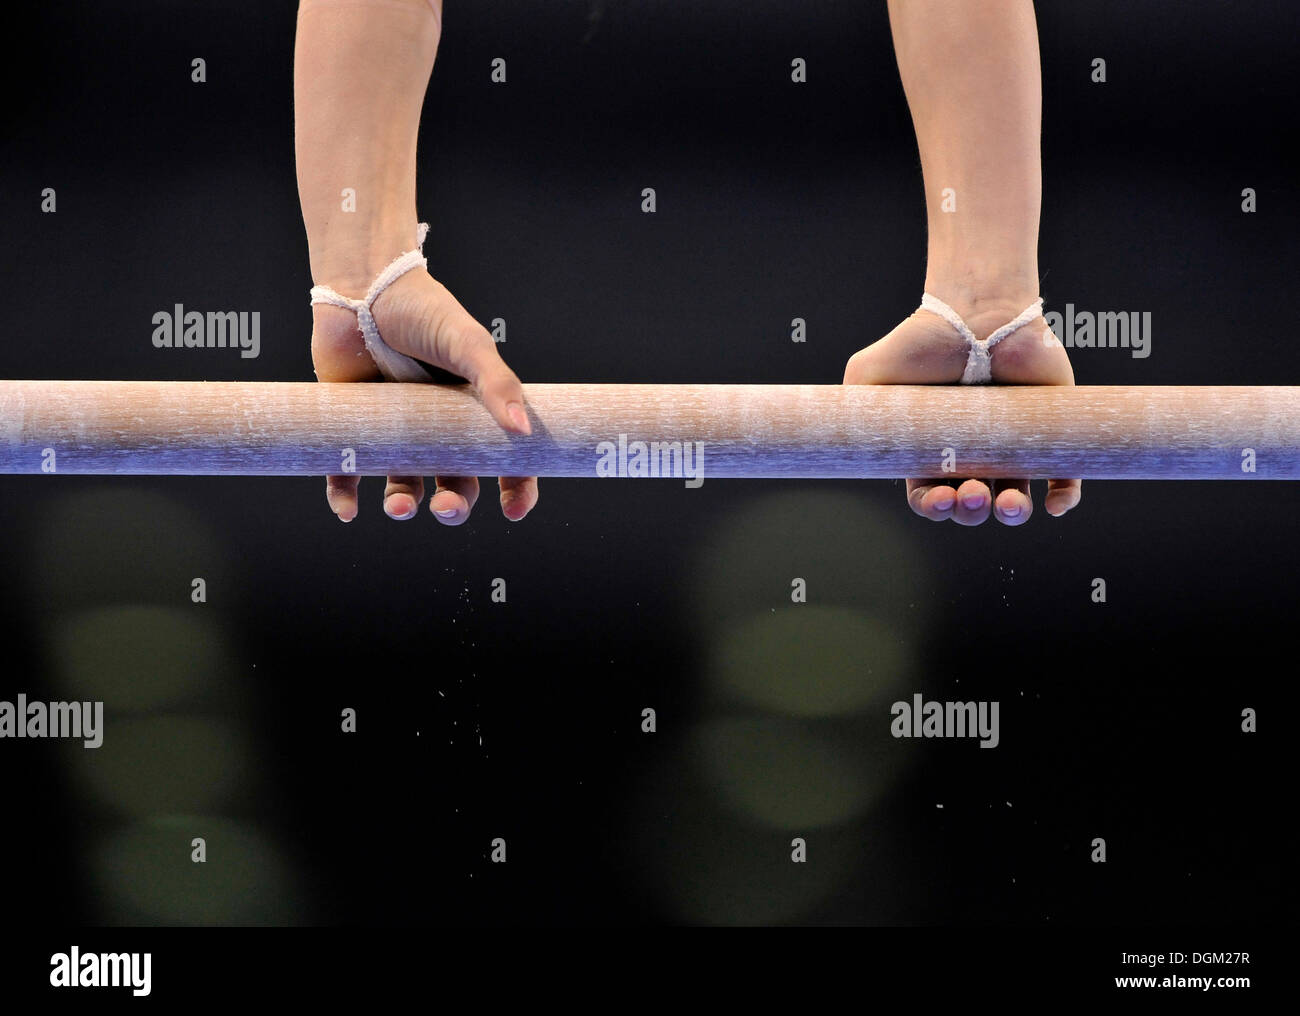 Detail, gymnast on uneven bars Stock Photo